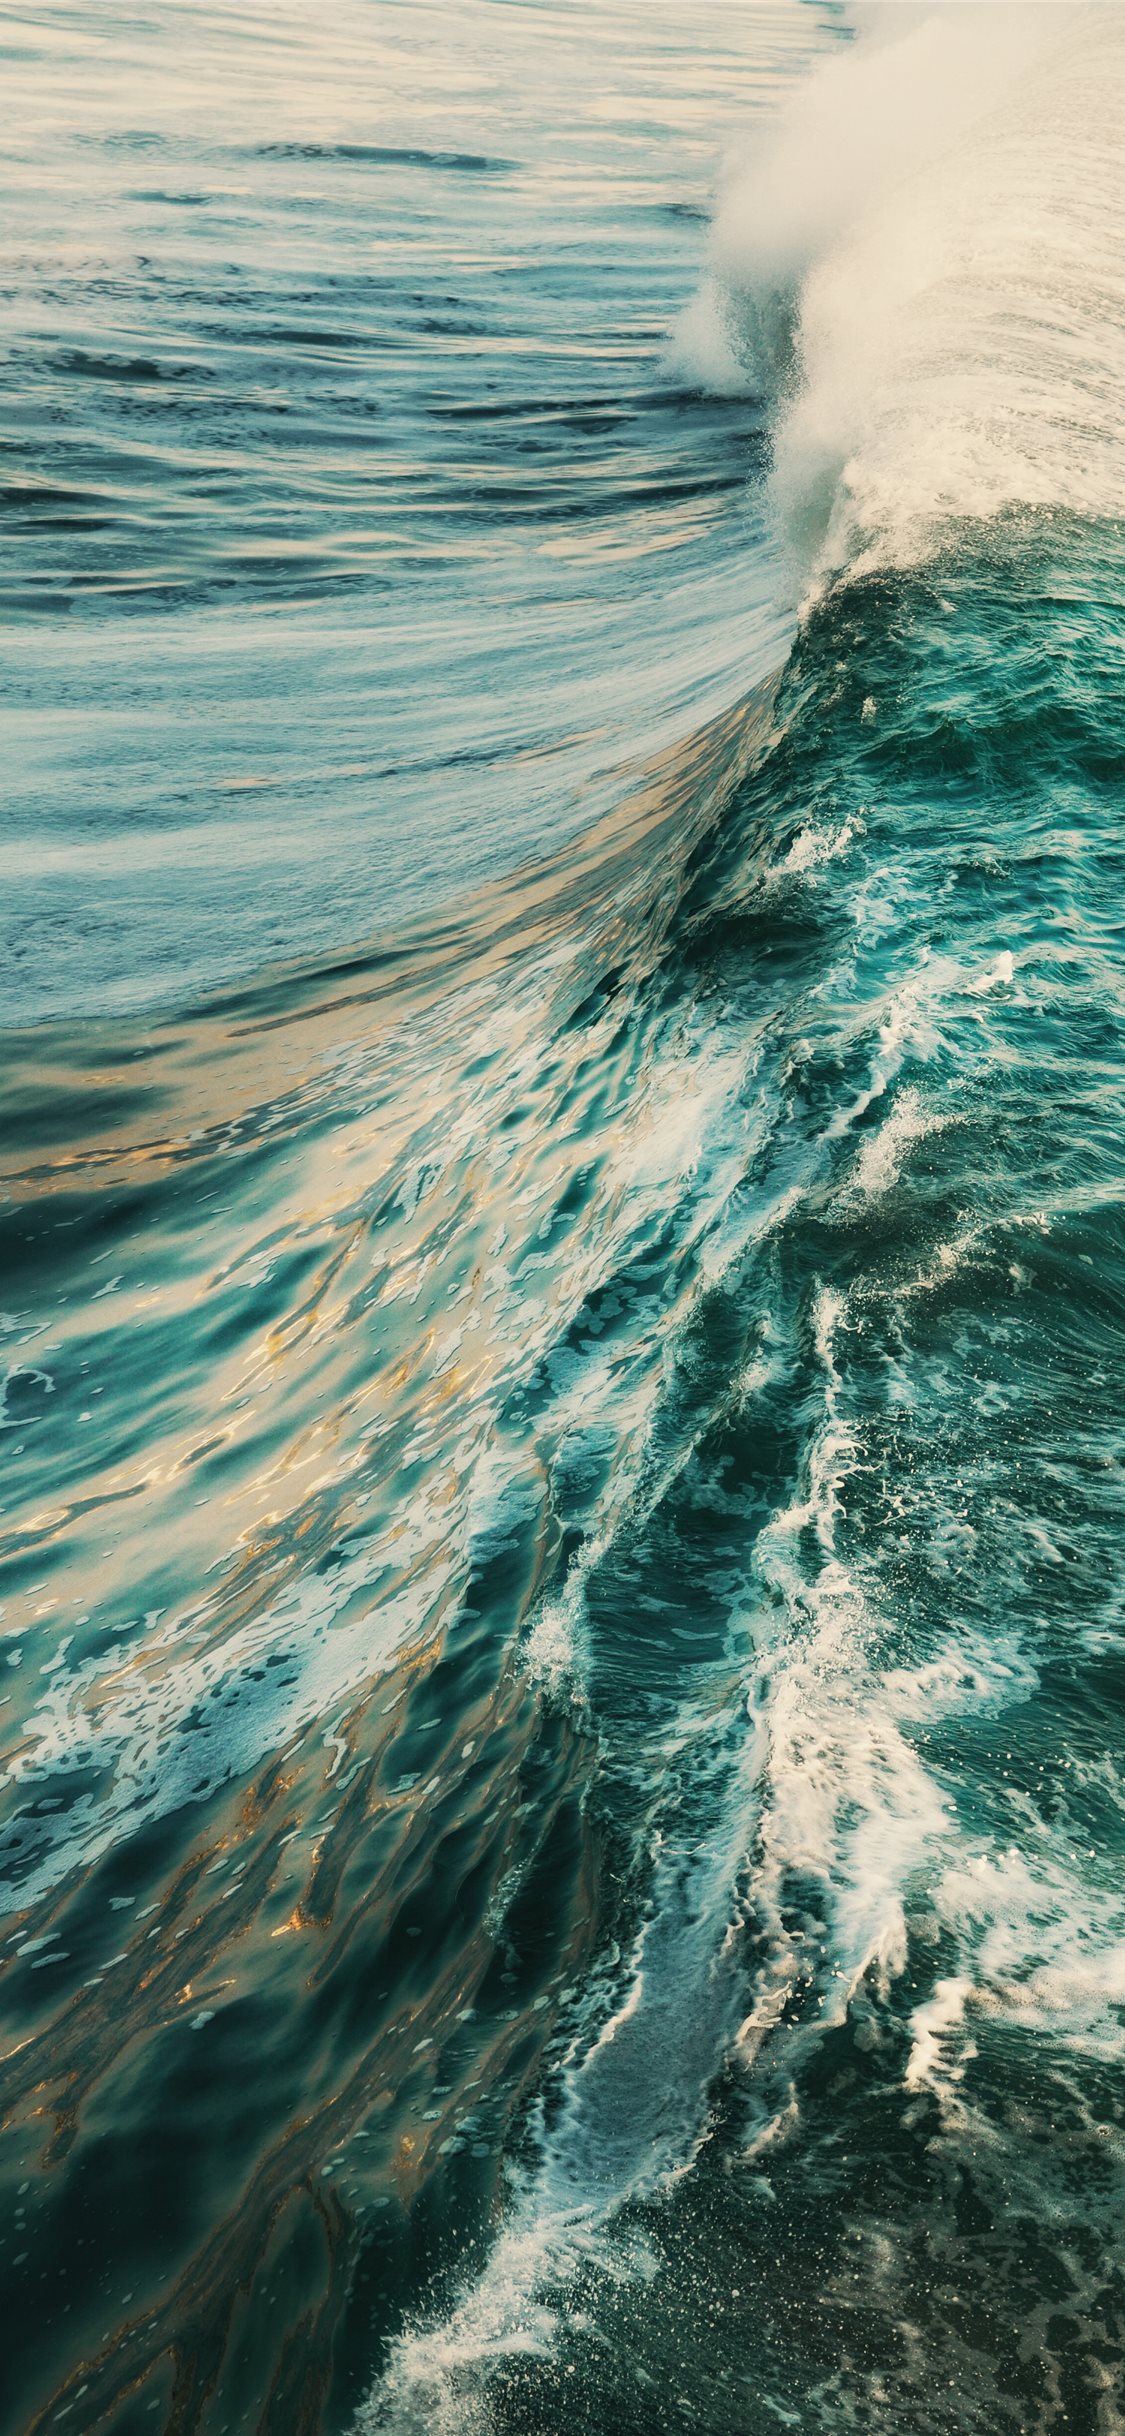 Waves Wallpapers